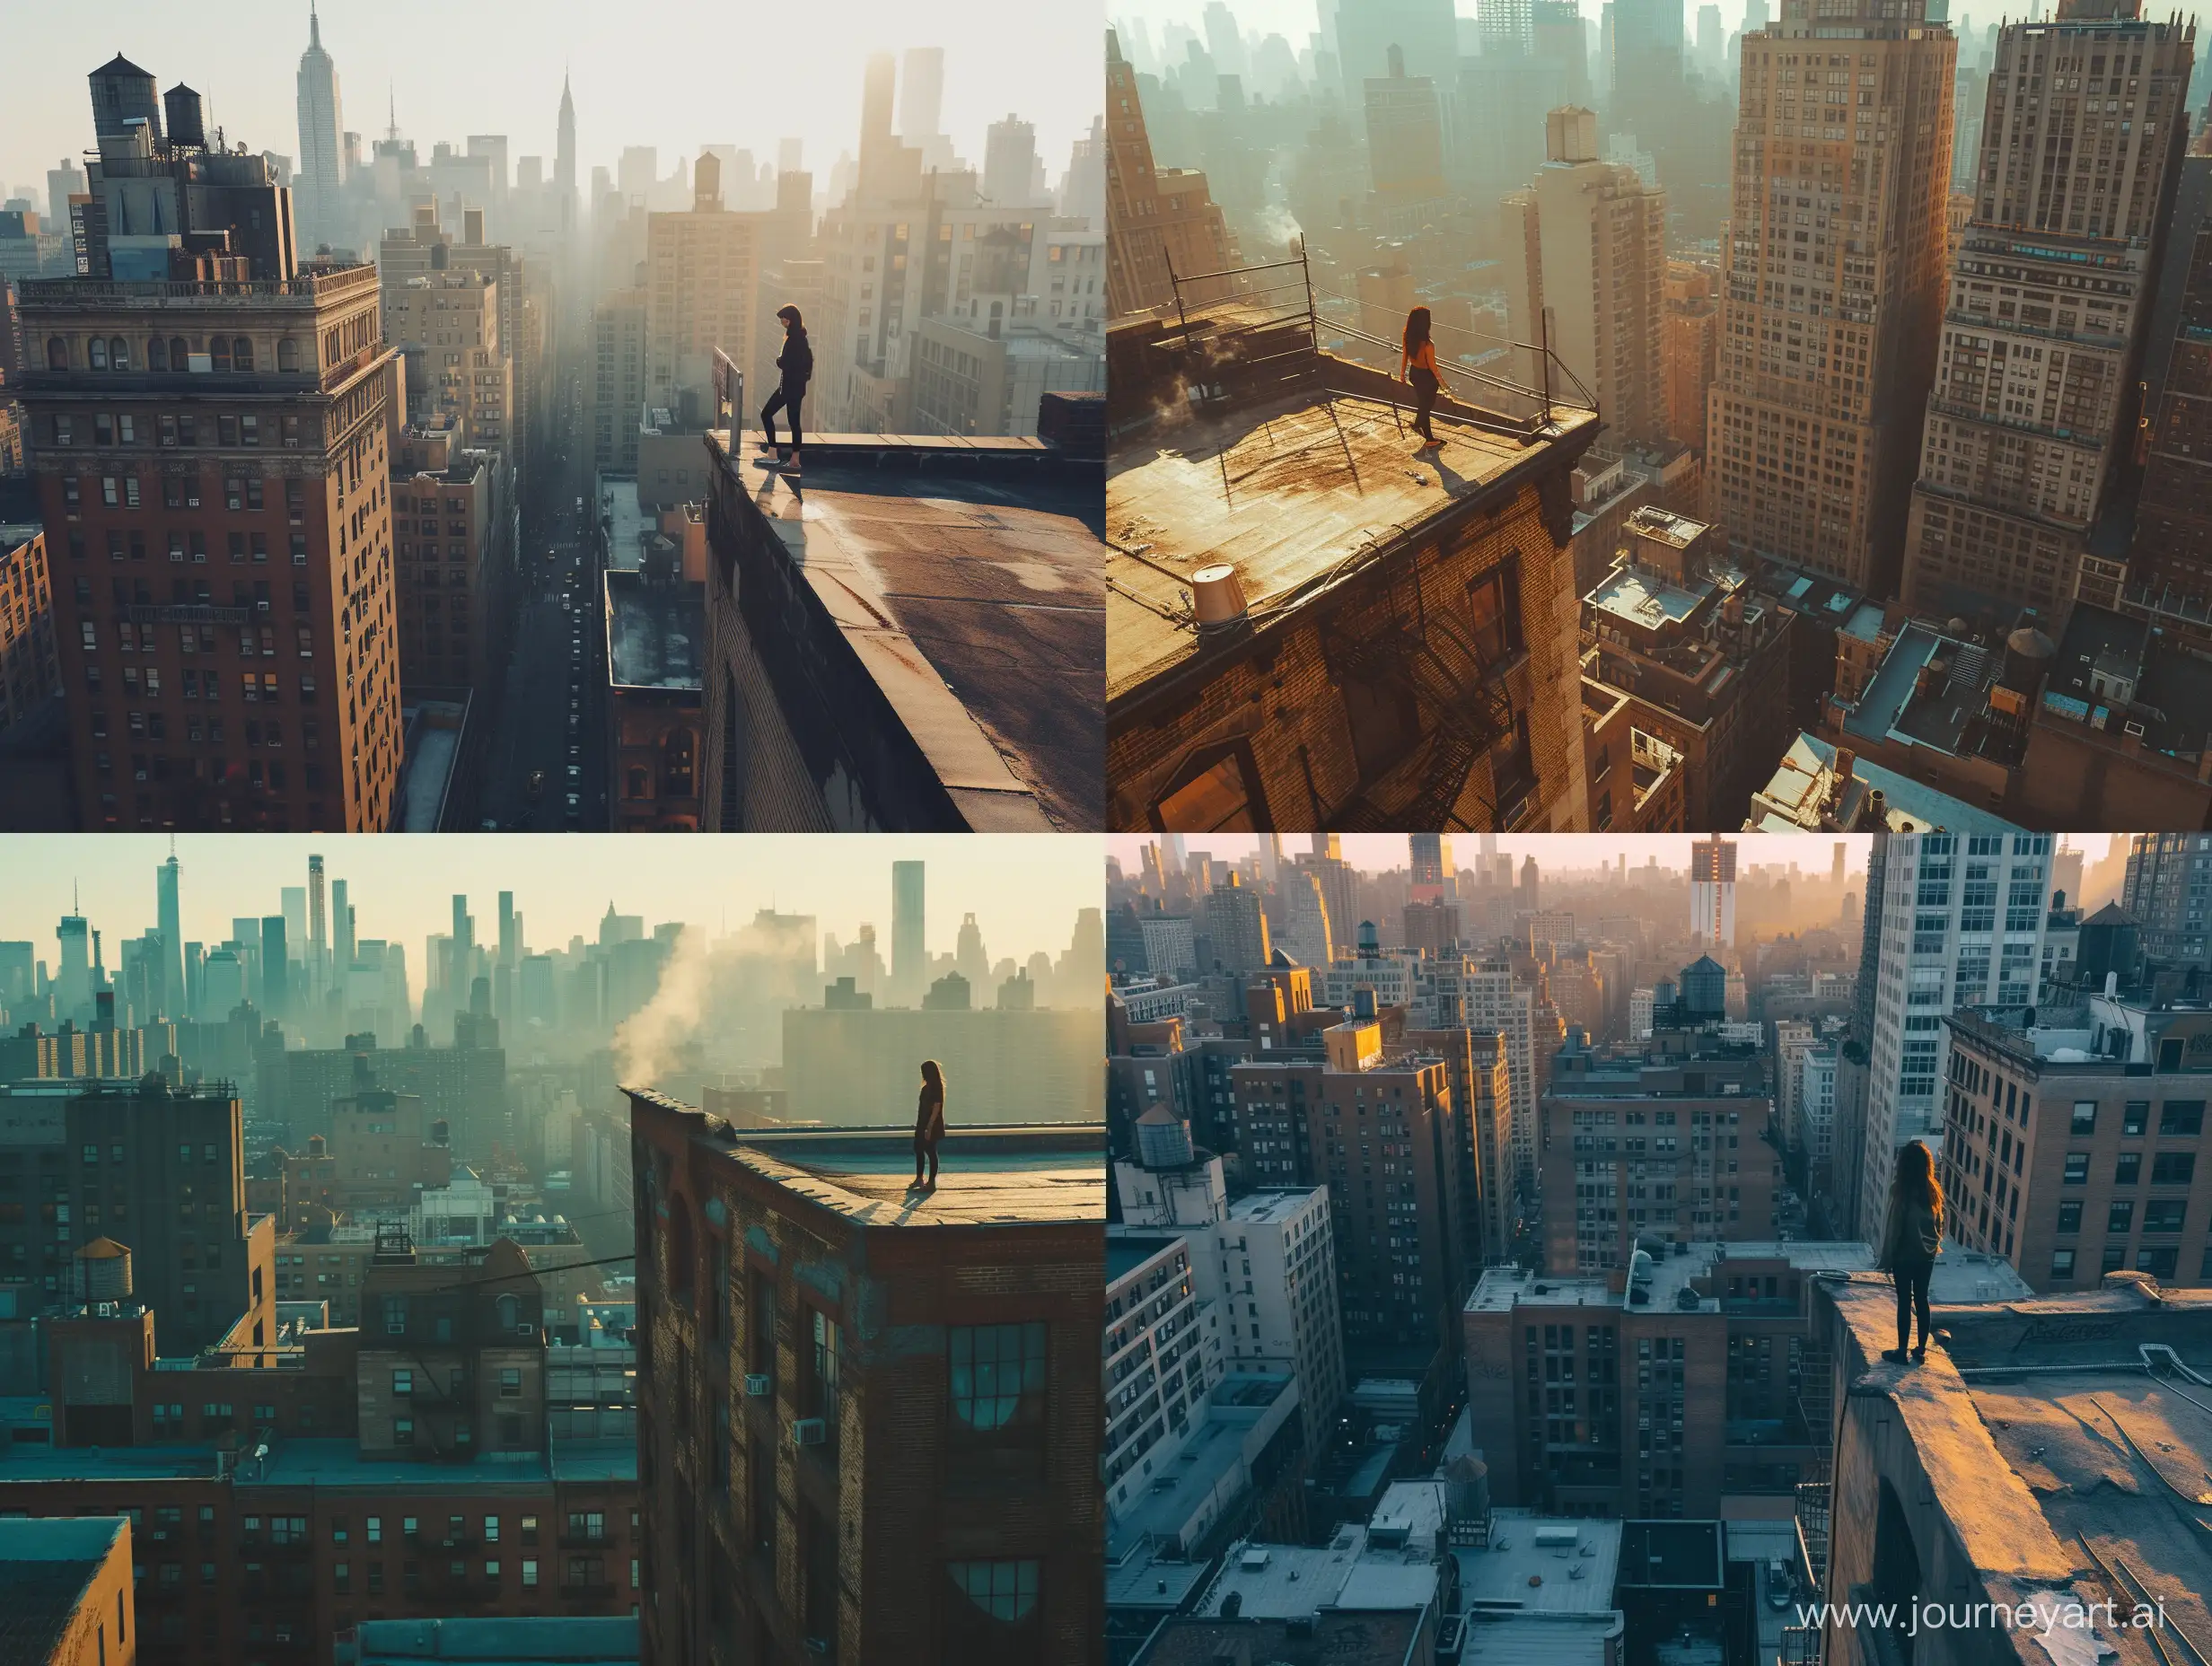 a bustling new new york city, the photo is bathed in natural lighting, relaxing day time setting. Shot in 4k with a high end DSLR camera. such as a Canon EOS R5 with a 50mm f/1. 2 lens, architecture, drone view, skyline, a woman is standing on the edge of a high rooftop, vivid, atmospheric, dystopian,
